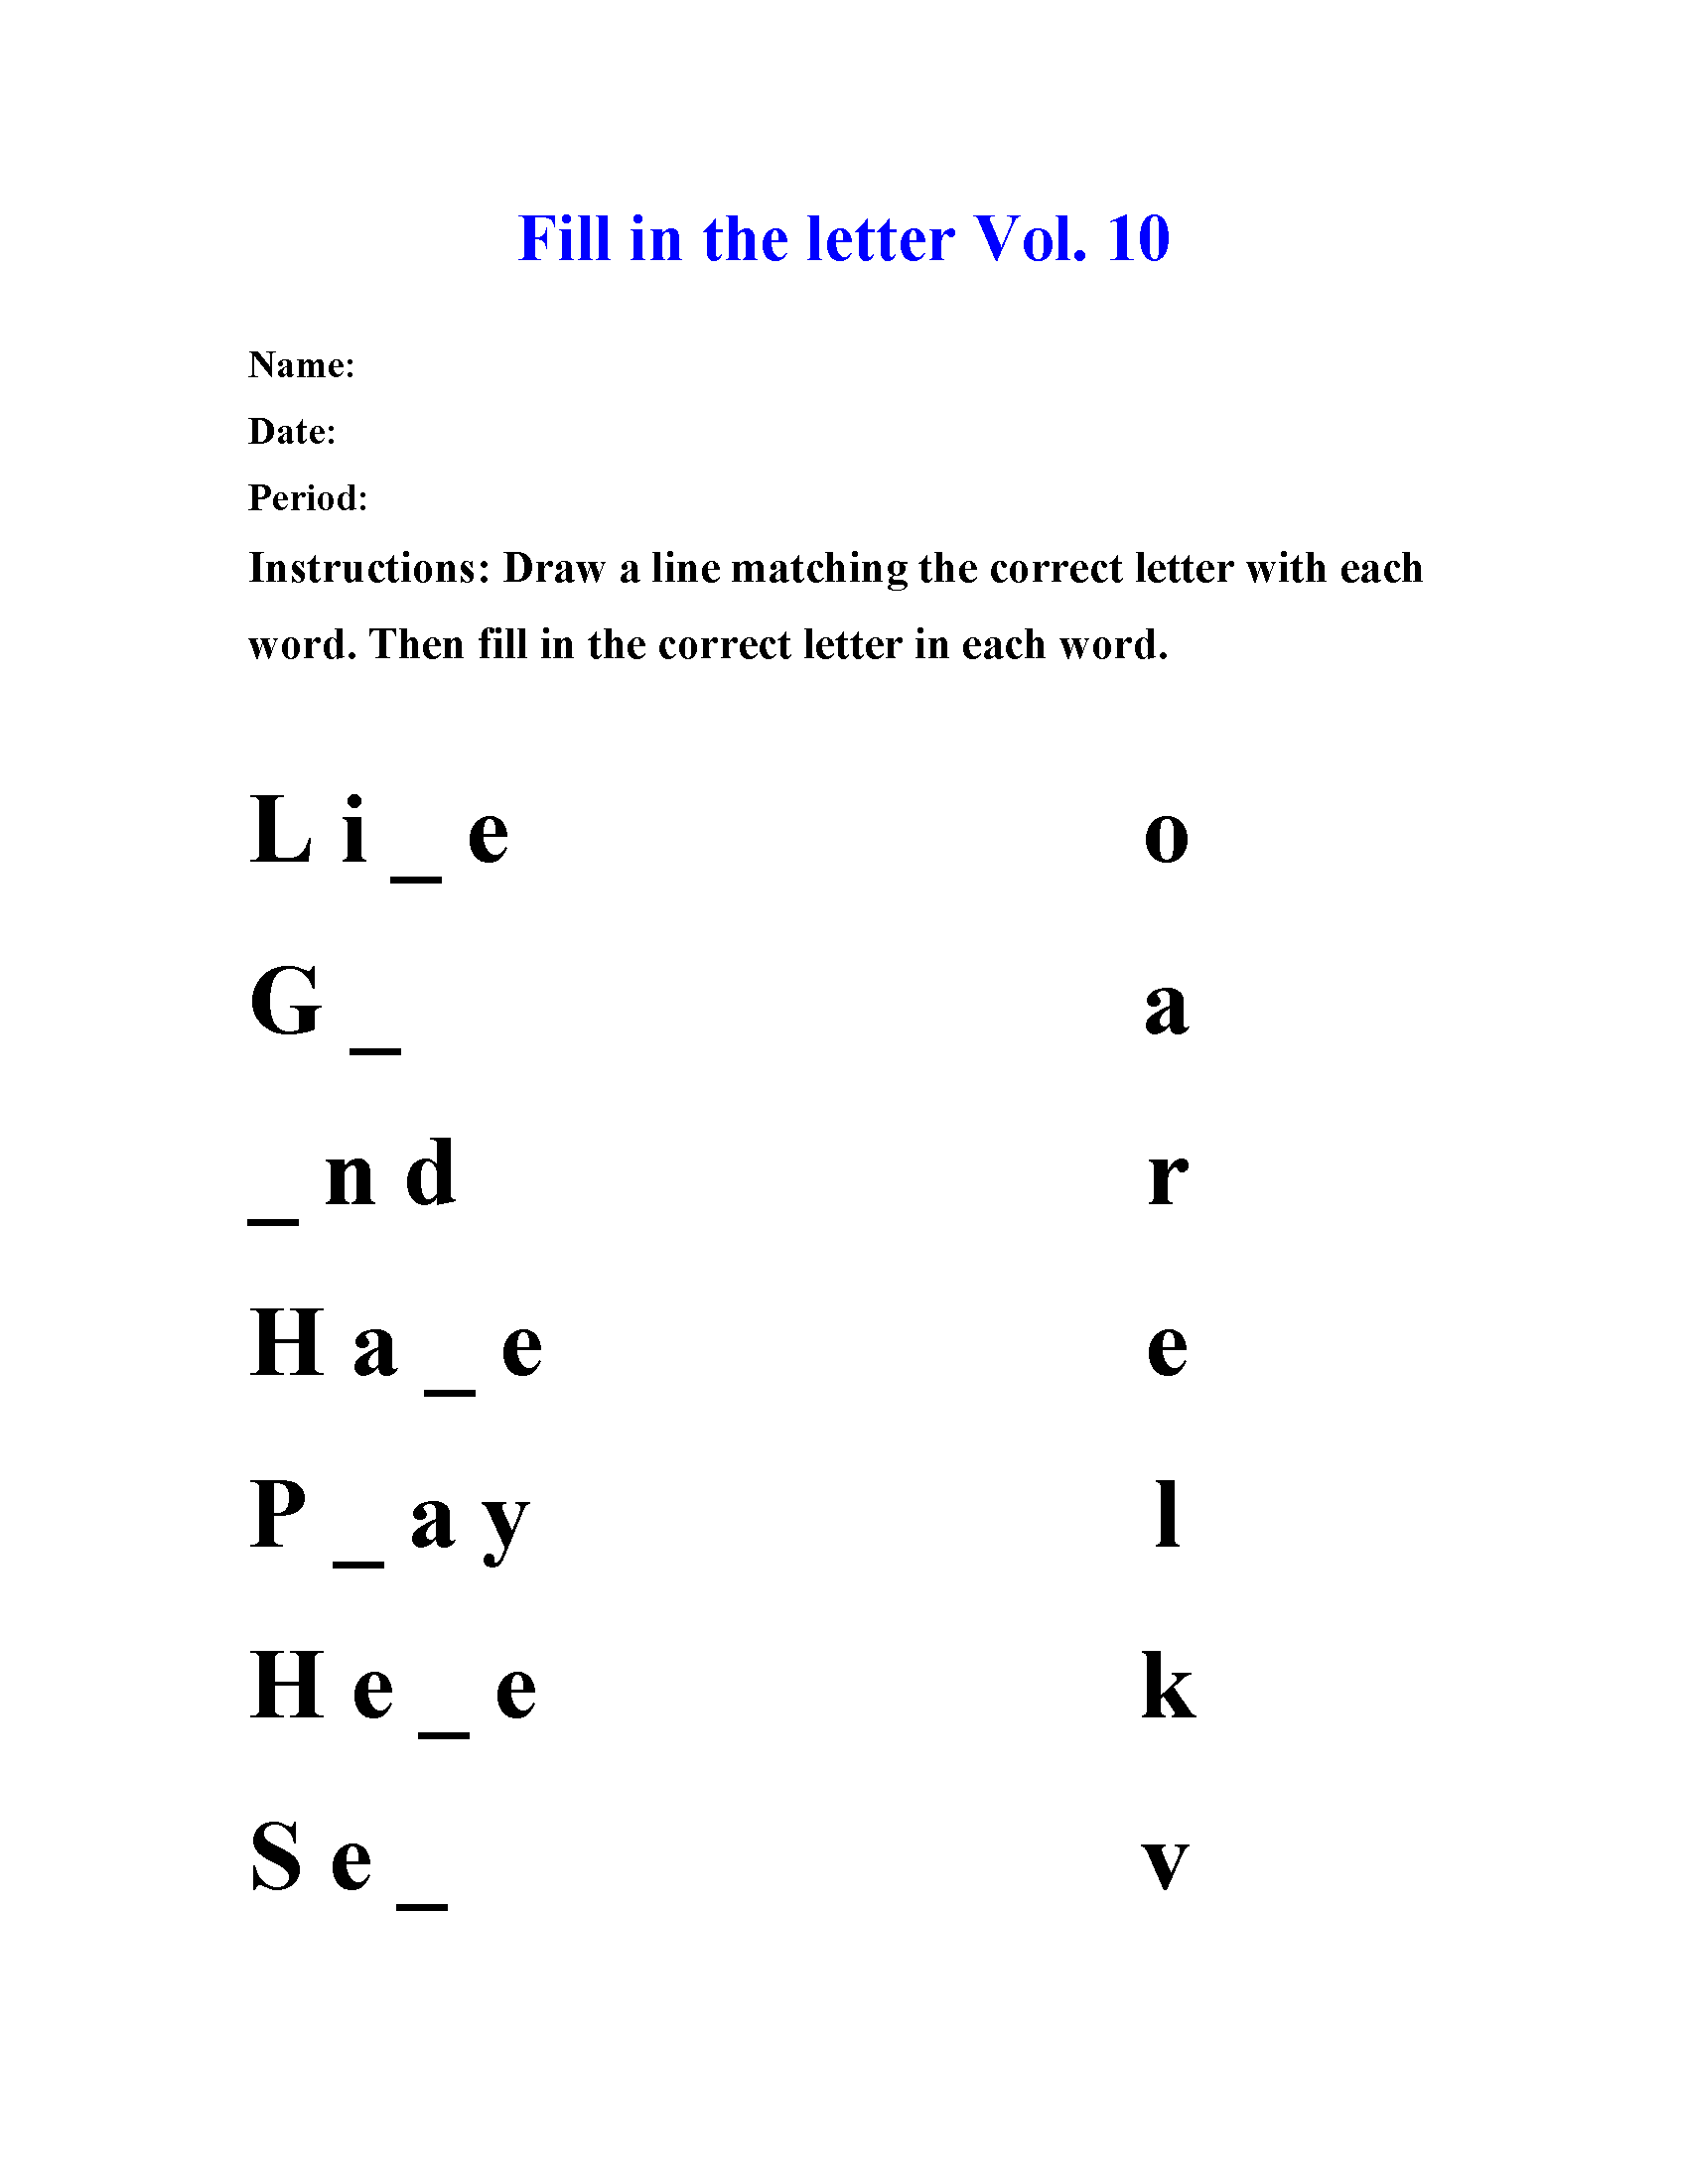 Fill in the letter Vol 10